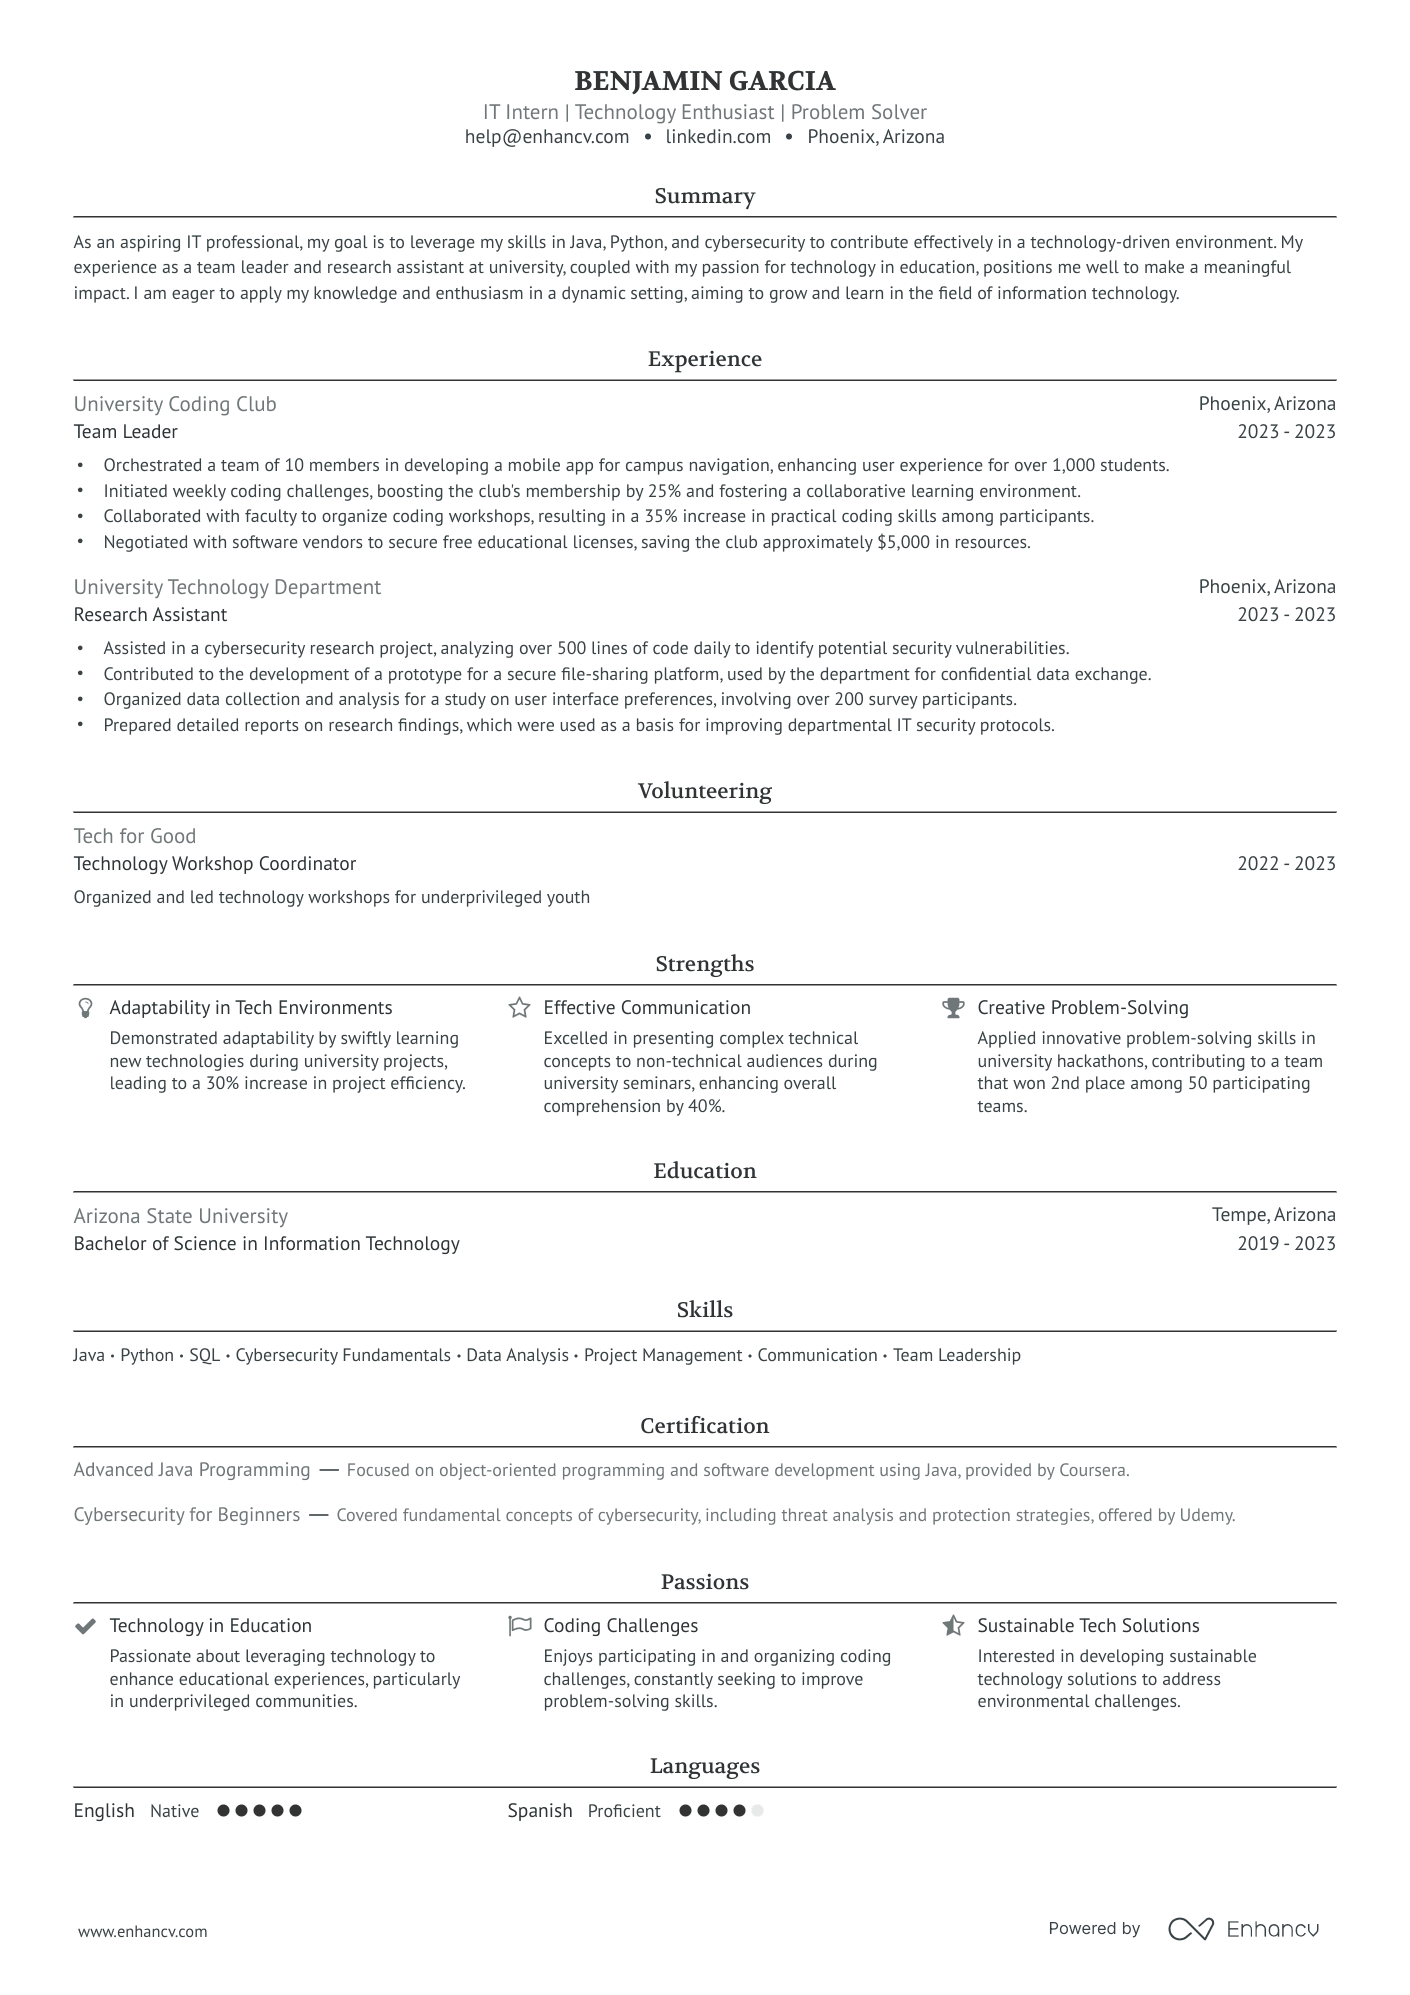 IT Intern | Technology Enthusiast | Problem Solver resume example